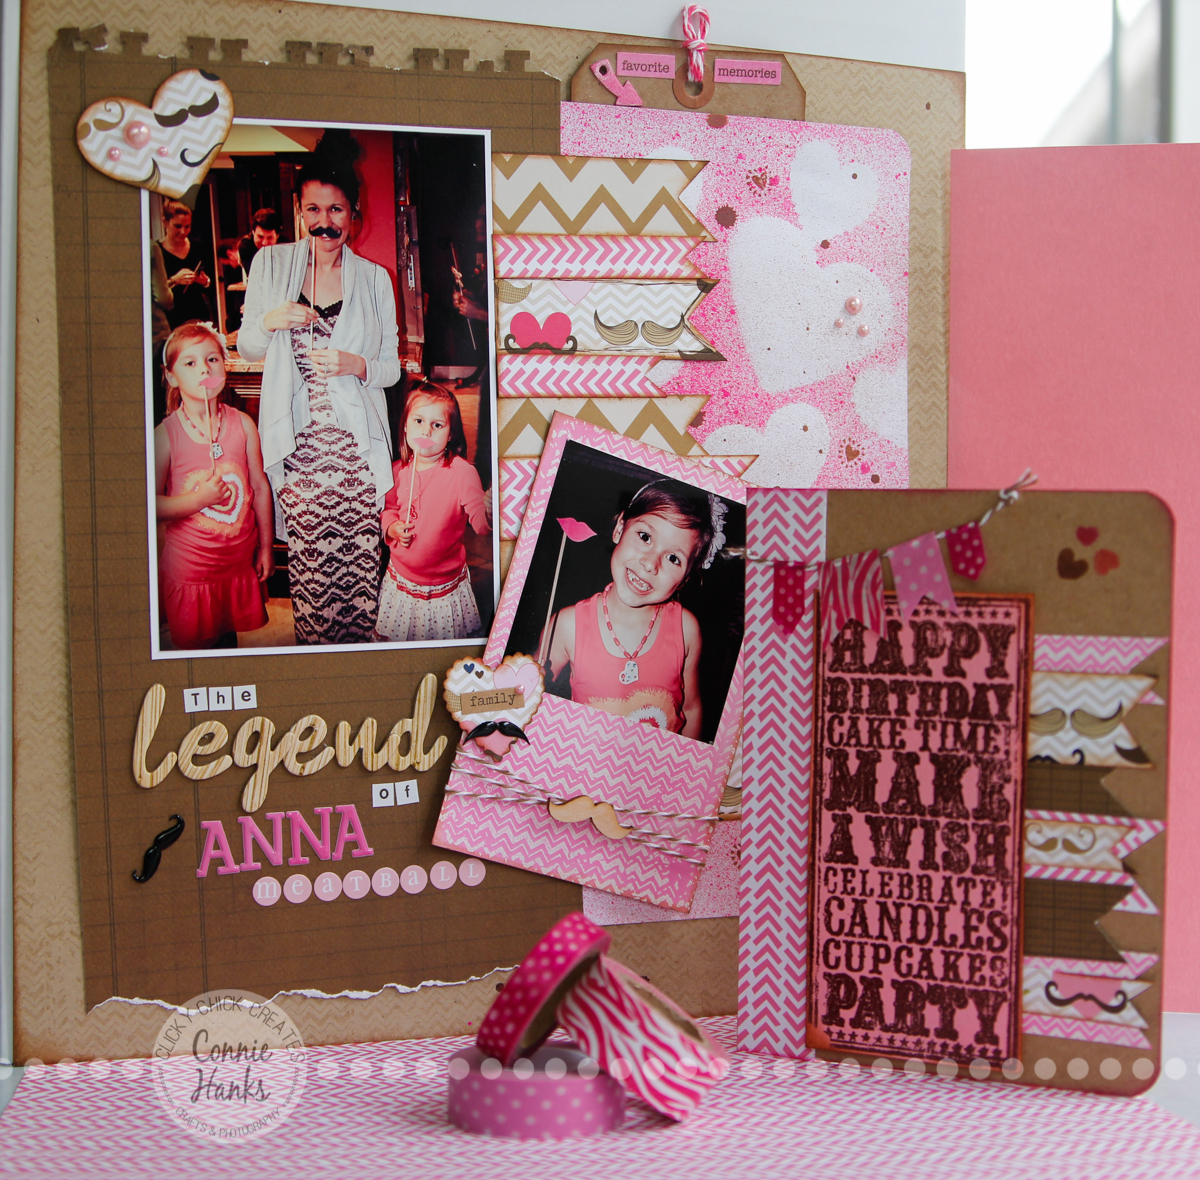 Connie Hanks Photography // ClickyChickCreates.com // The Legend of Anna Meatball scrapbook layout using Sweet Stamps Distressed Chevron stamp, Tim Holtz Distress Ink in Picked Raspberry, Dylusions Spray Ink in Bubblegum Pink, washi tape